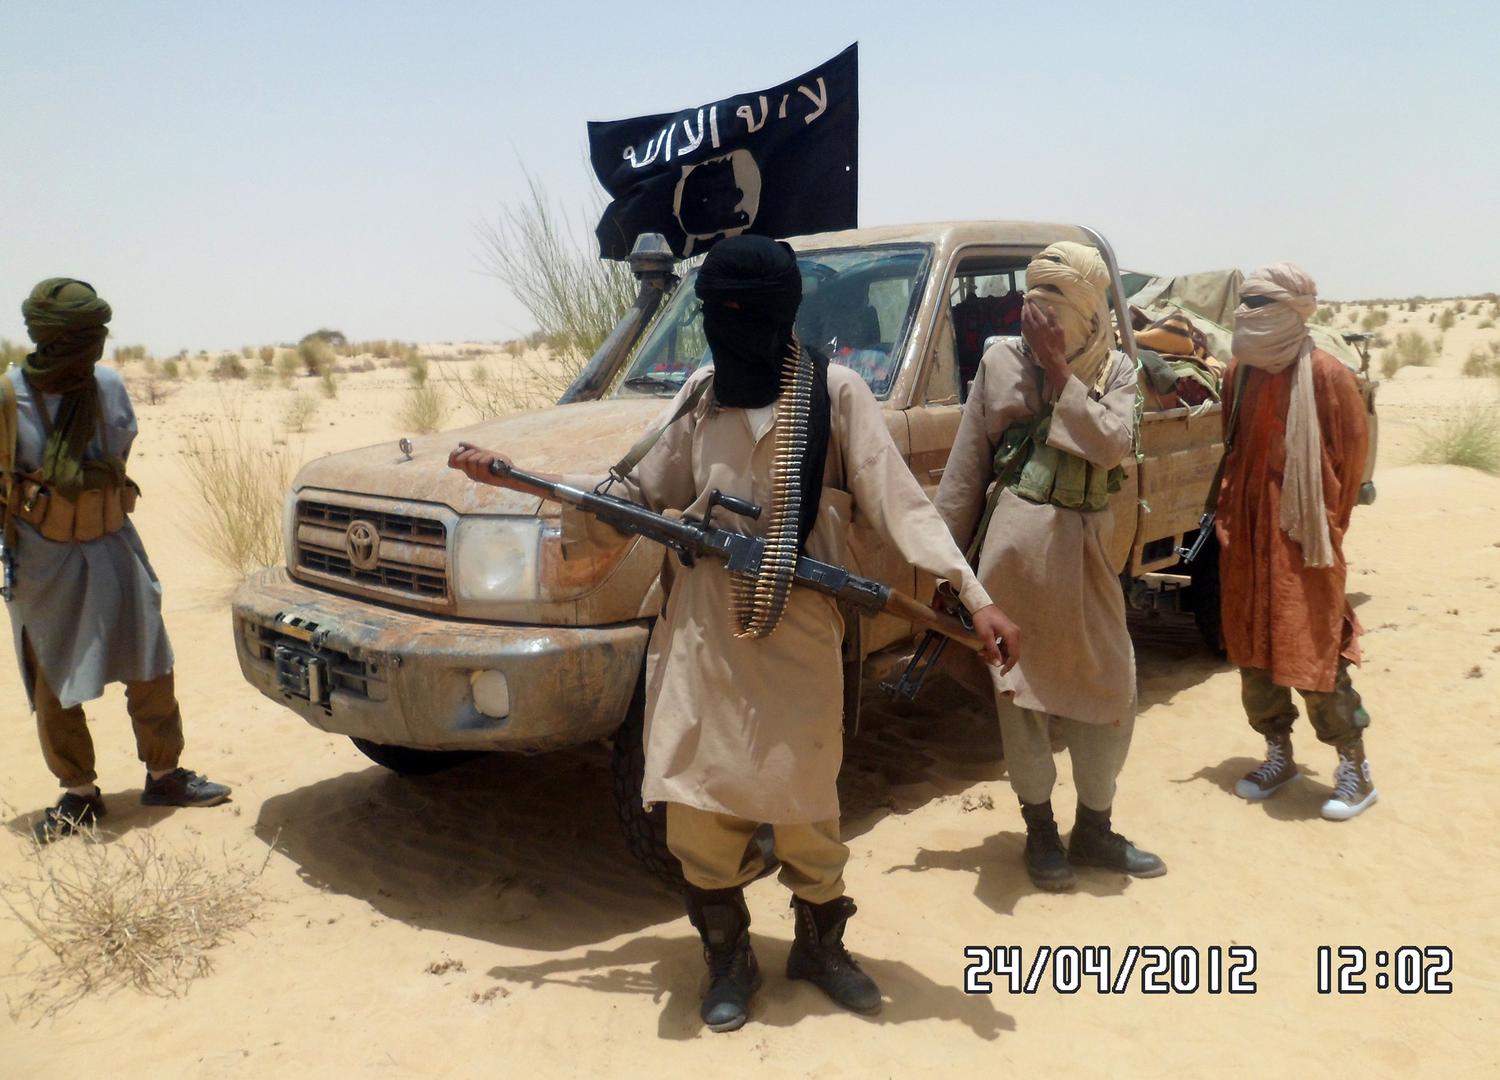 Members of Islamist Armed group in Mali in 2012. The growing presence of armed Islamist groups allied to Al-Qaeda in the Islamic Maghreb (AQIM) and the Islamic State in the Greater Sahara (ISGS) is linked to insecurity in neighboring Mali, where northern 